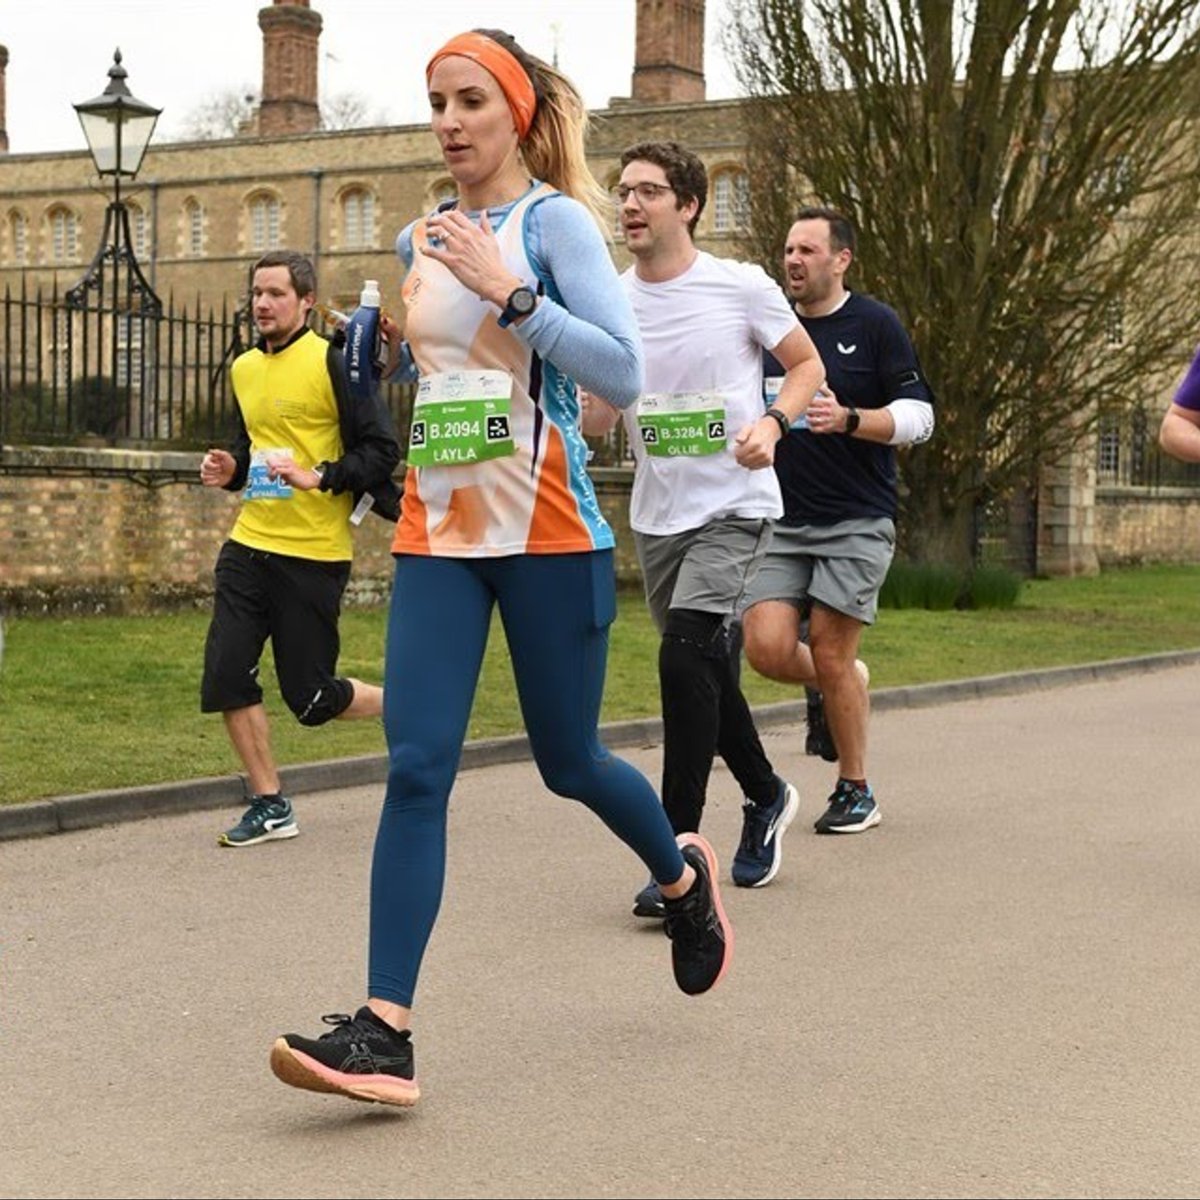 “I get so emotional when I see the sea of orange & remember exactly why I’m running. I want to do something positive to stop dementia in its tracks.'

Layla ran the @CambridgeHalfUK to honour her mum who is diagnosed with Alzheimer's.🧡 

Sign up today👇🏽
alzheimersresearchuk.org/events/cambrid…